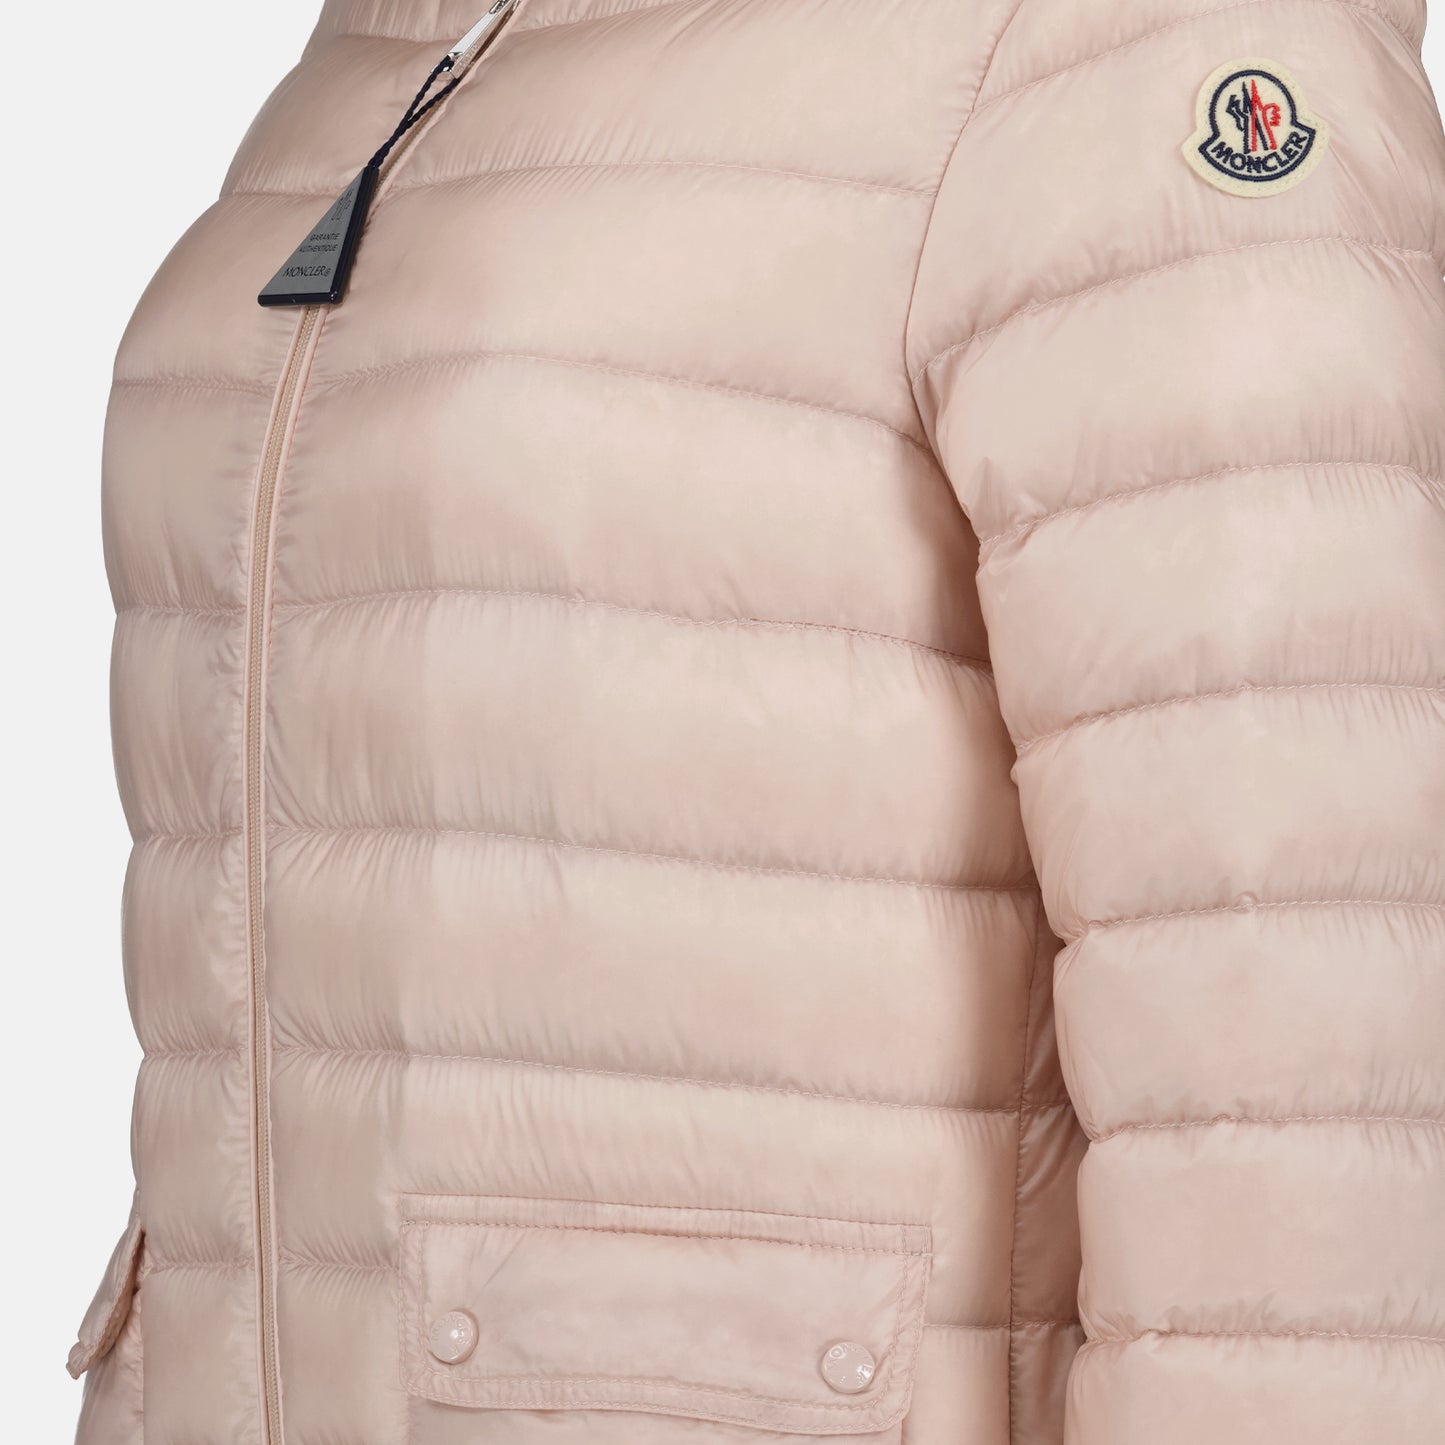 Lans quilted jacket